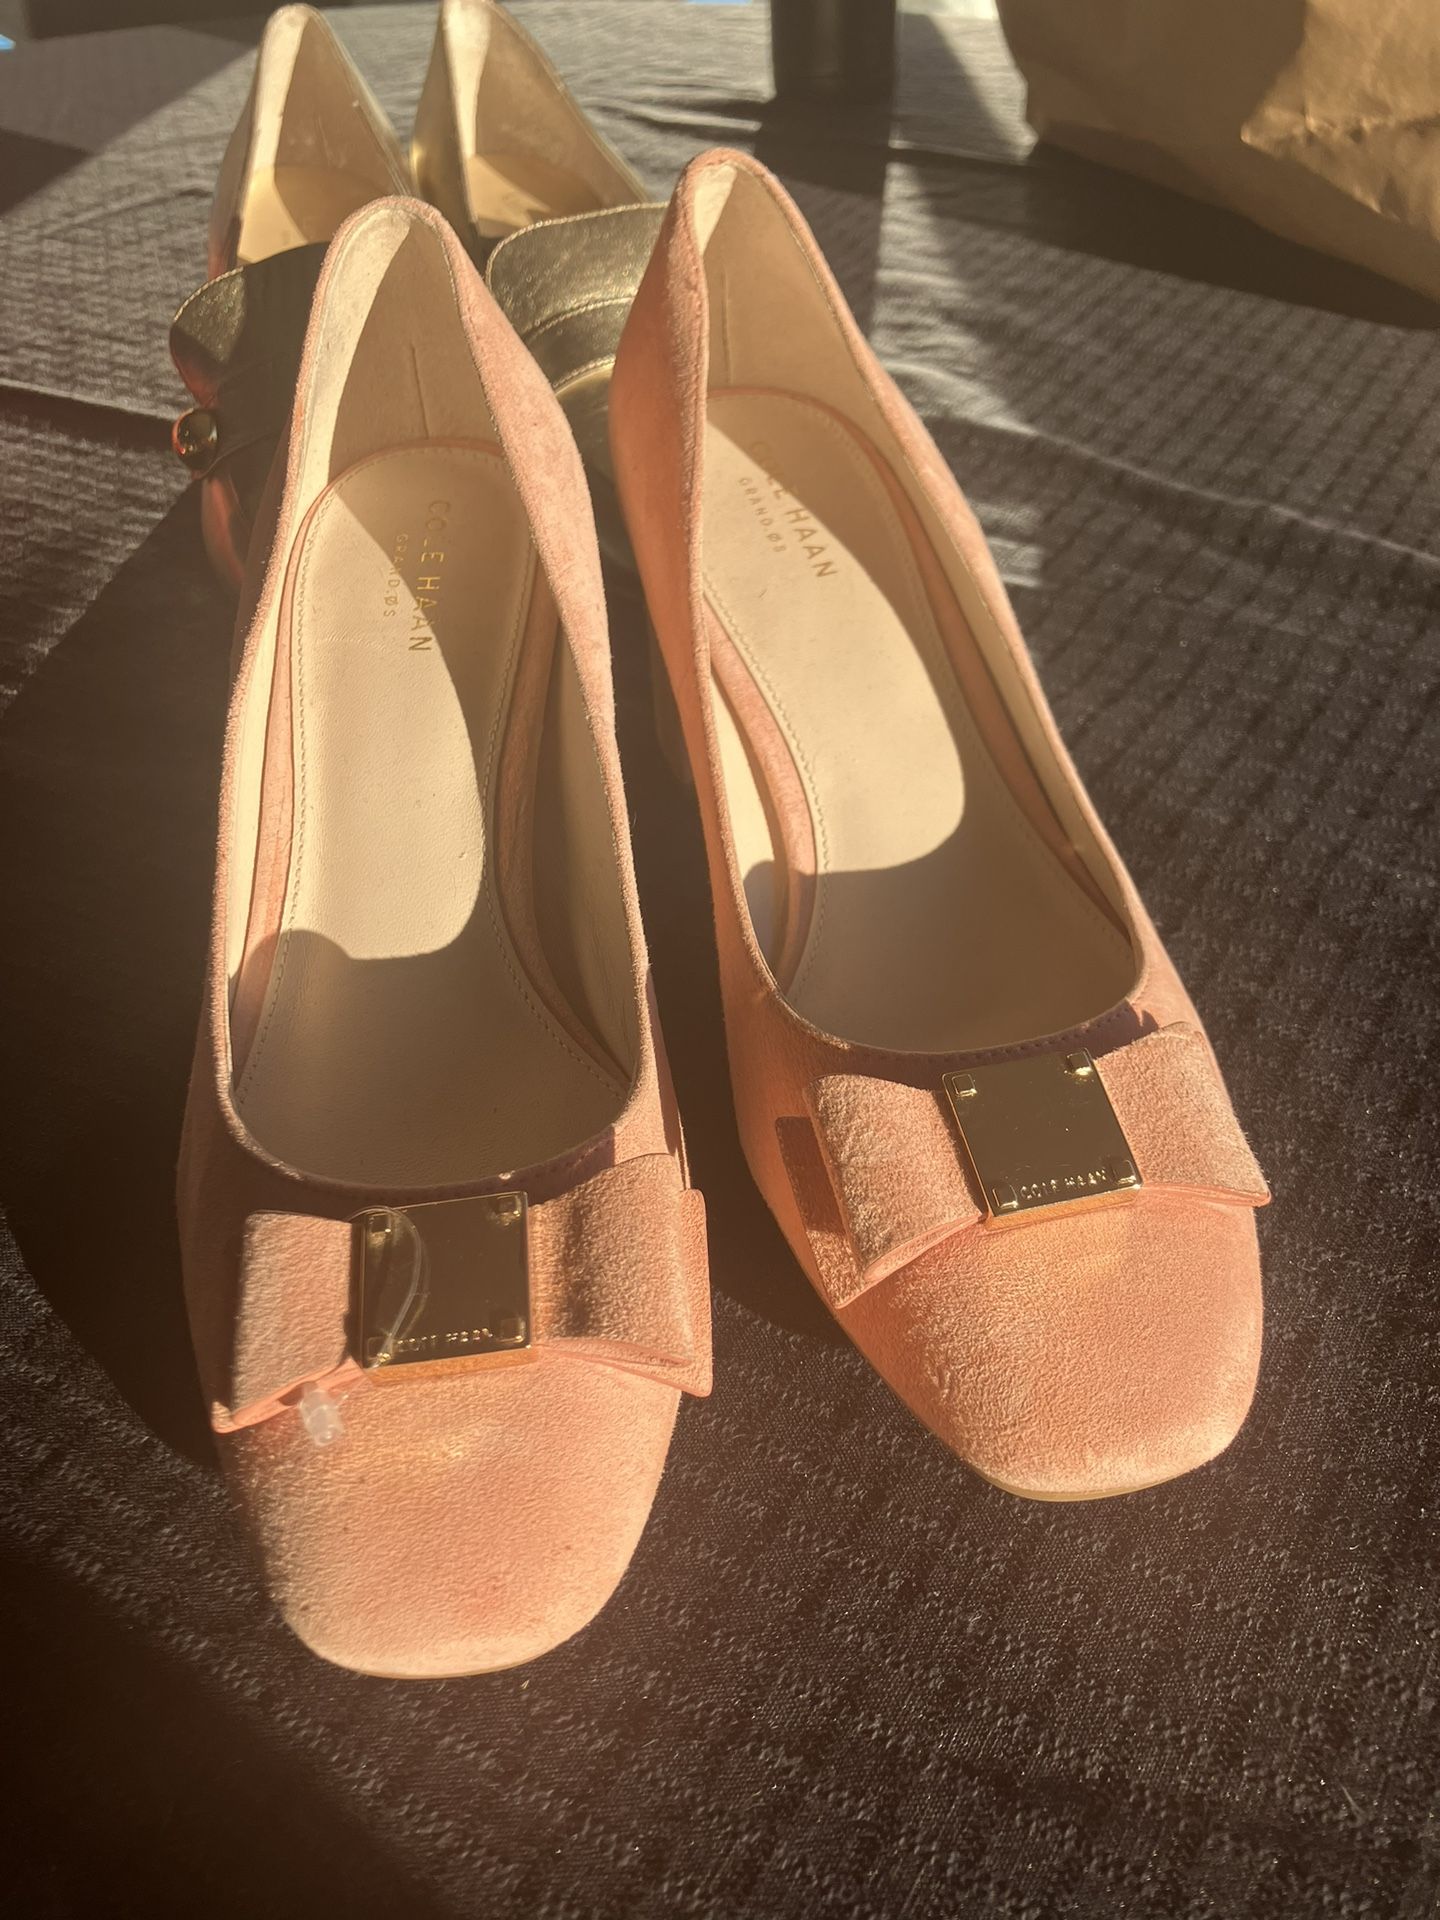 Cole Haan Square Heel Pink Suede Size 8.5